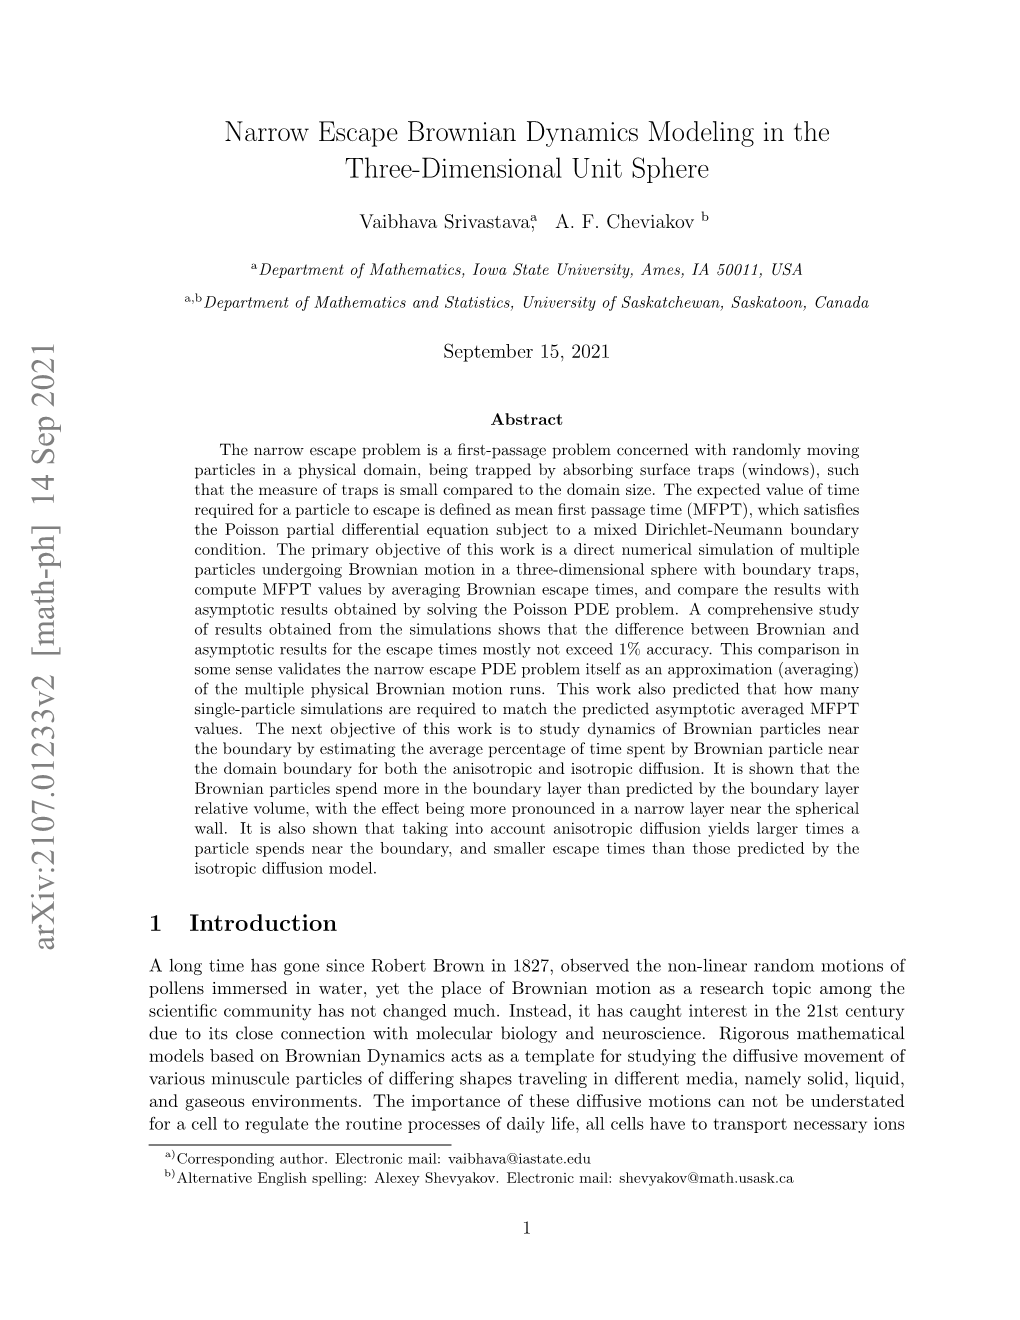 Narrow Escape Brownian Dynamics Modeling in the Three-Dimensional Unit Sphere